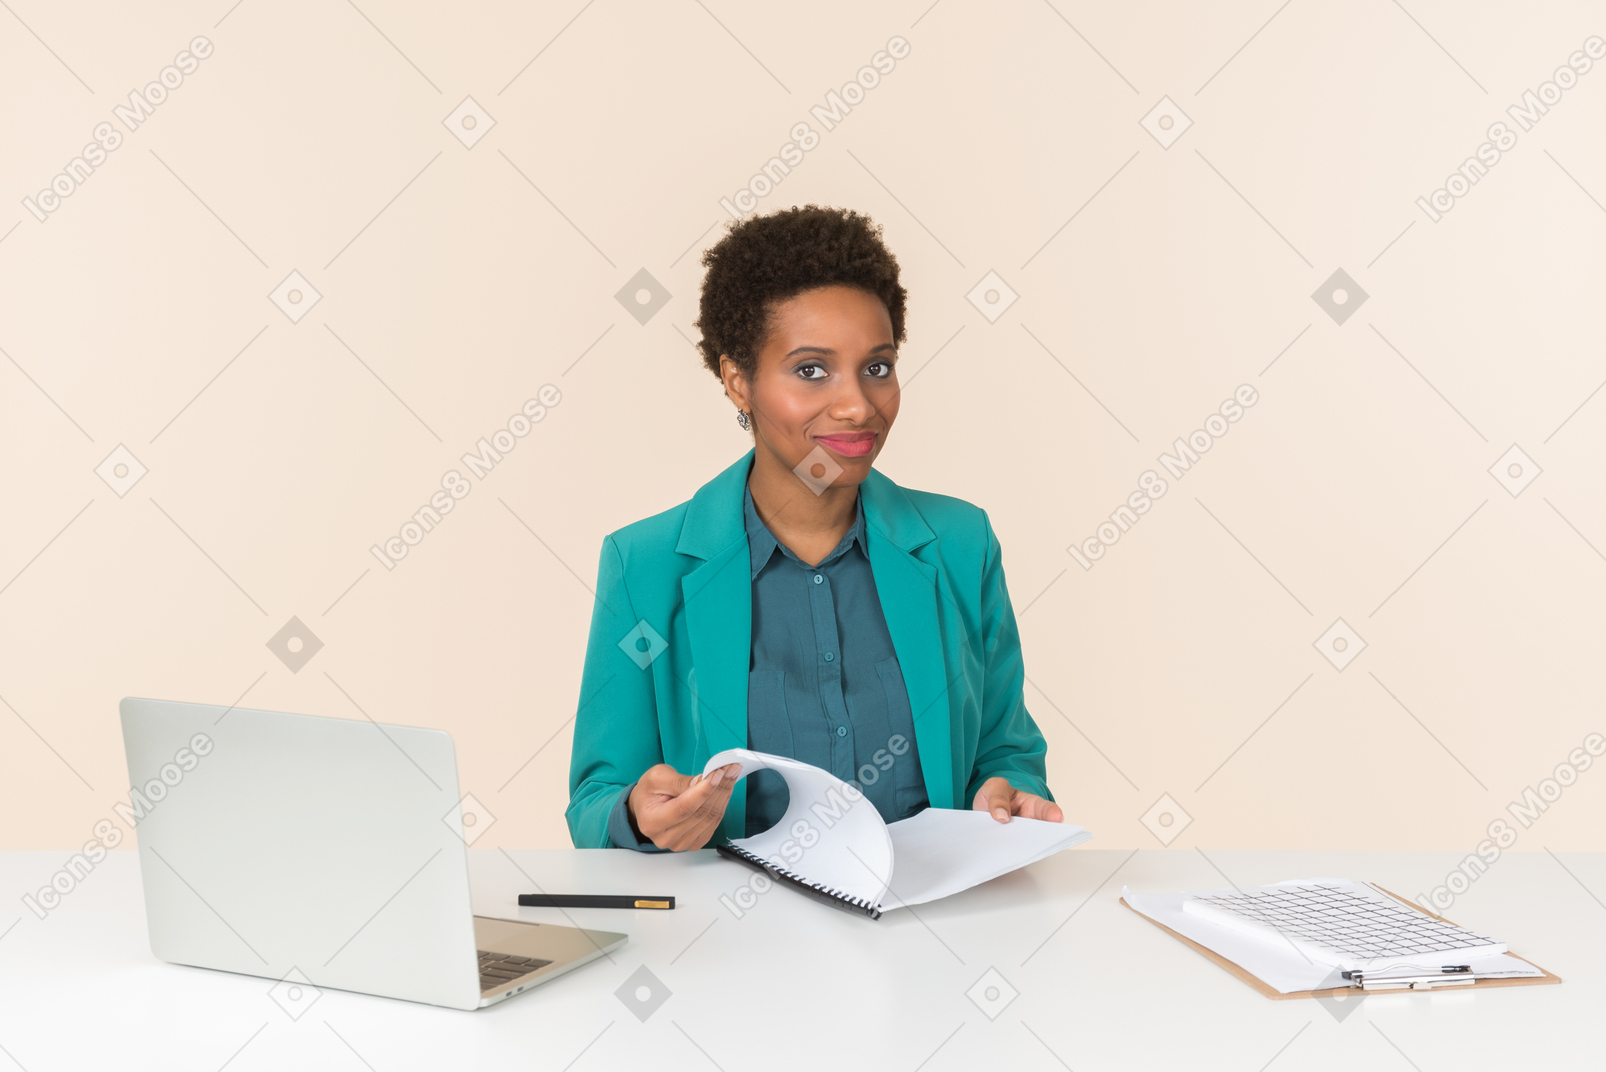 Female office employee sitting at the desk and checking papers